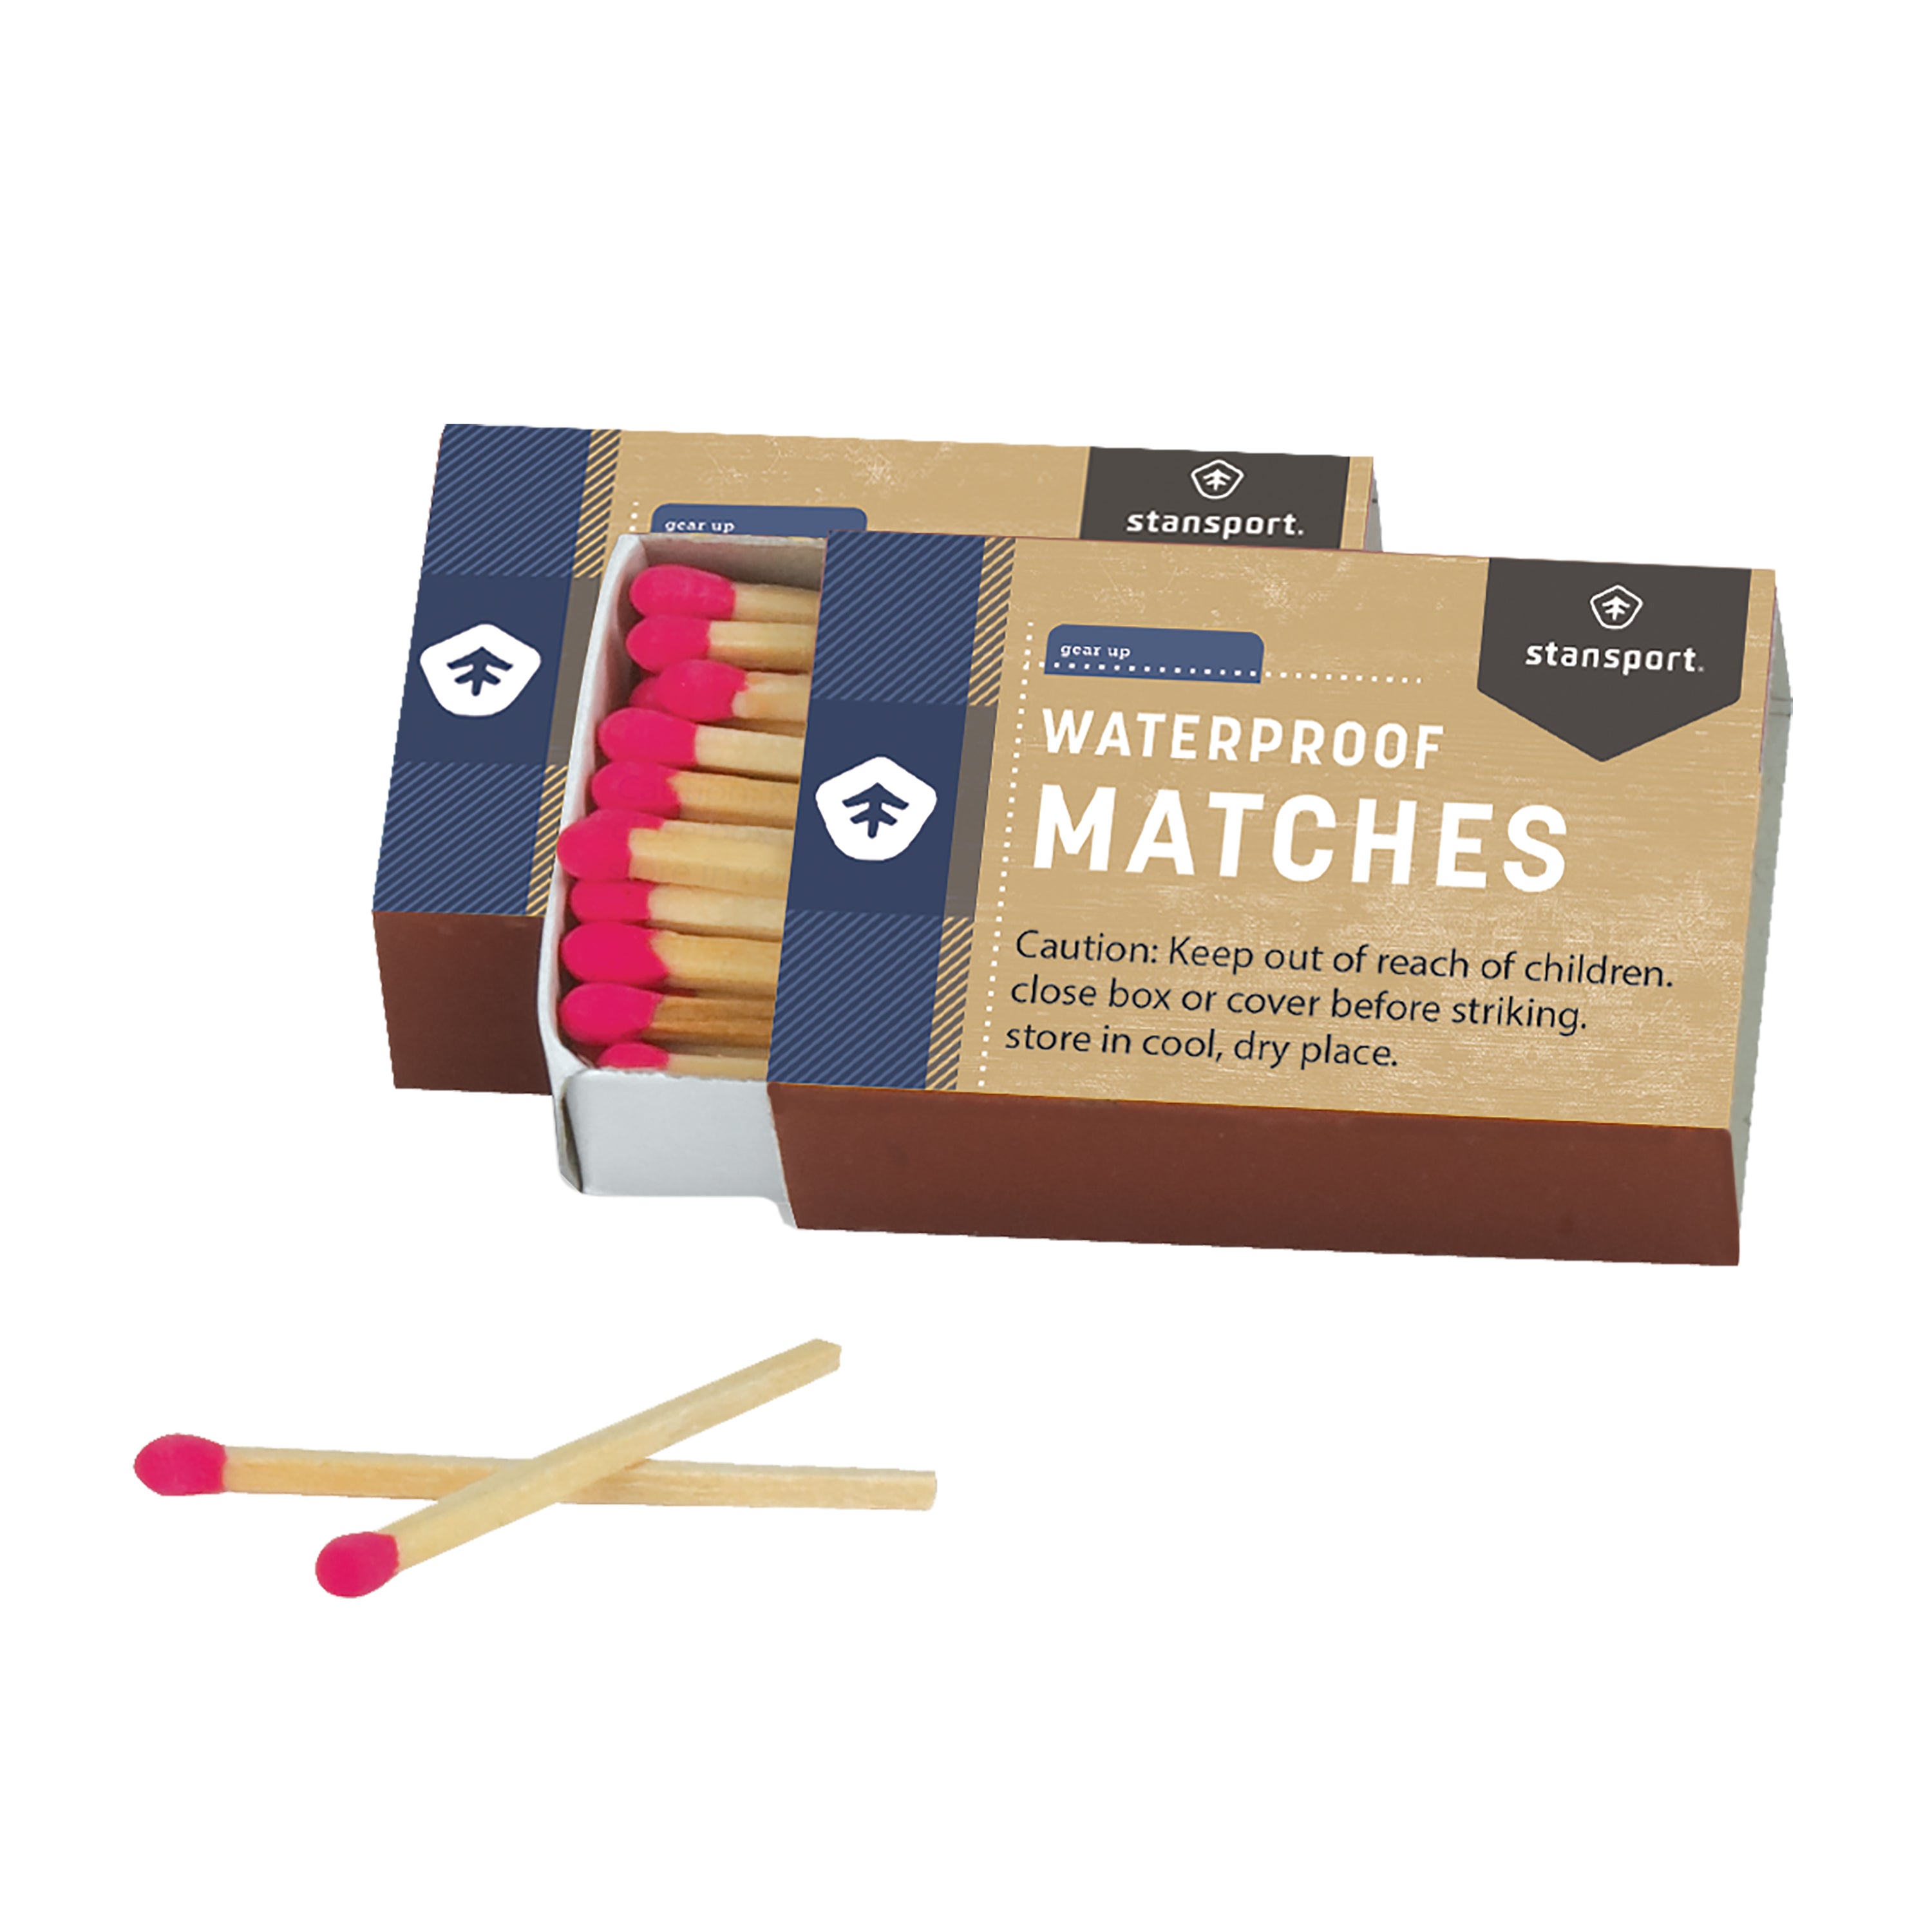 Waterproof Matches - Boxed - Bulk Pack-eSafety Supplies, Inc